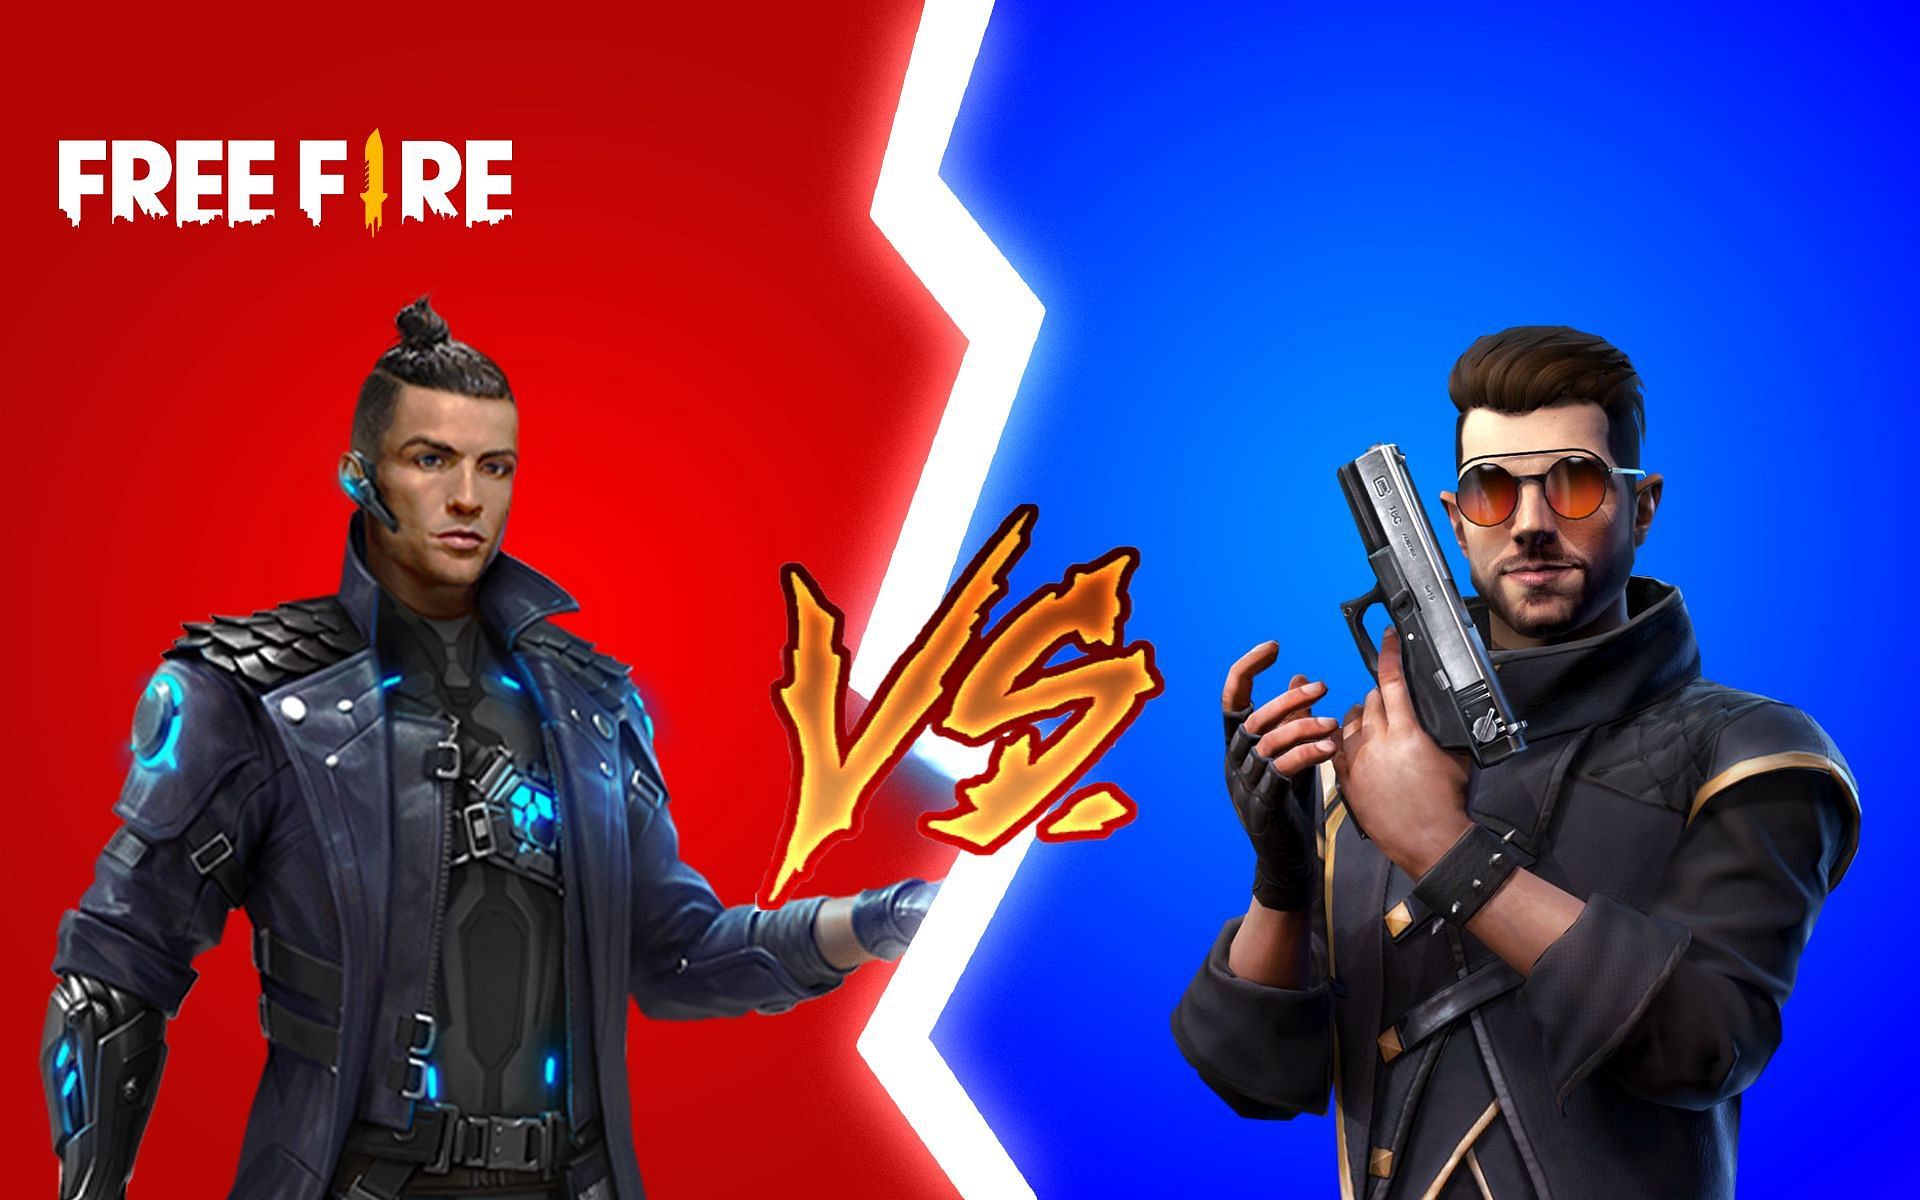 DJ Alok vs Chrono: Who is the better Free Fire character after the OB31 update? (Image via Sportskeeda)